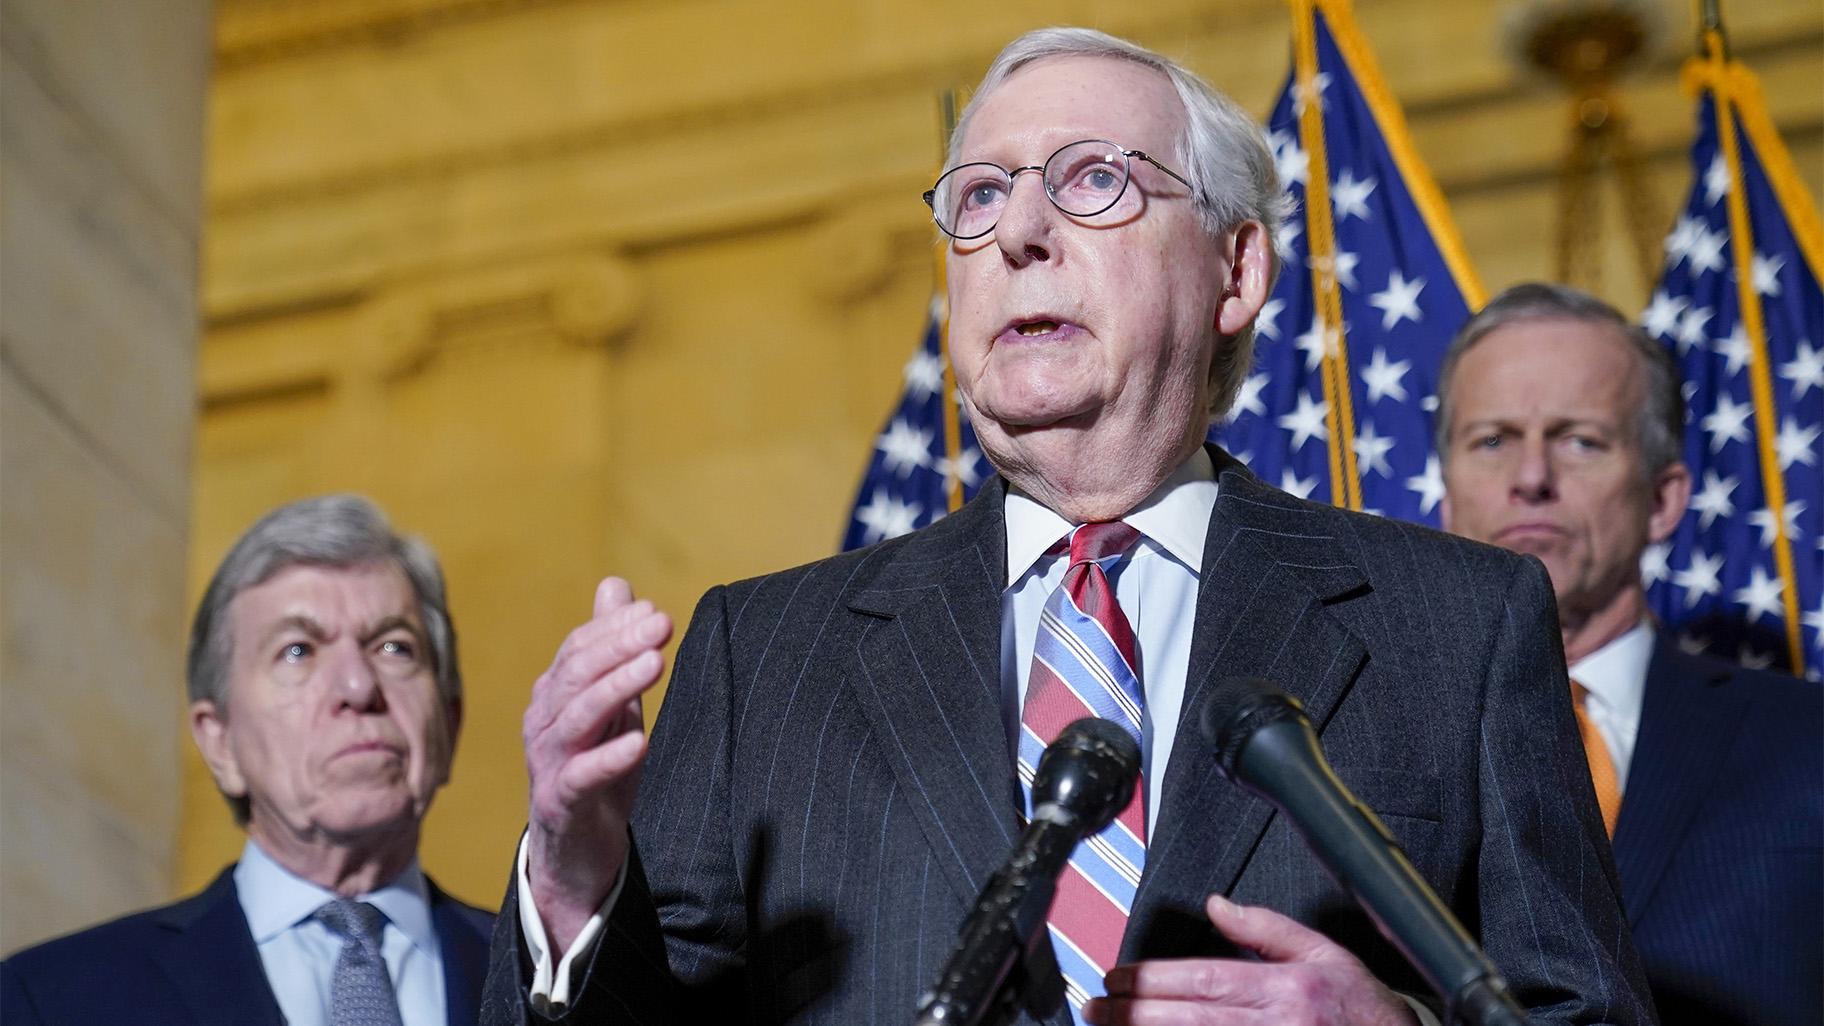 Senate Minority Leader Mitch McConnell of Ky., center, speaks to reporters on Capitol Hill in Washington, Tuesday, Feb. 8, 2022. Standing with McConnell is Sen. Roy Blunt, R-Mo., left, and Sen. John Thune, R-S.D., right. (AP Photo / Susan Walsh)